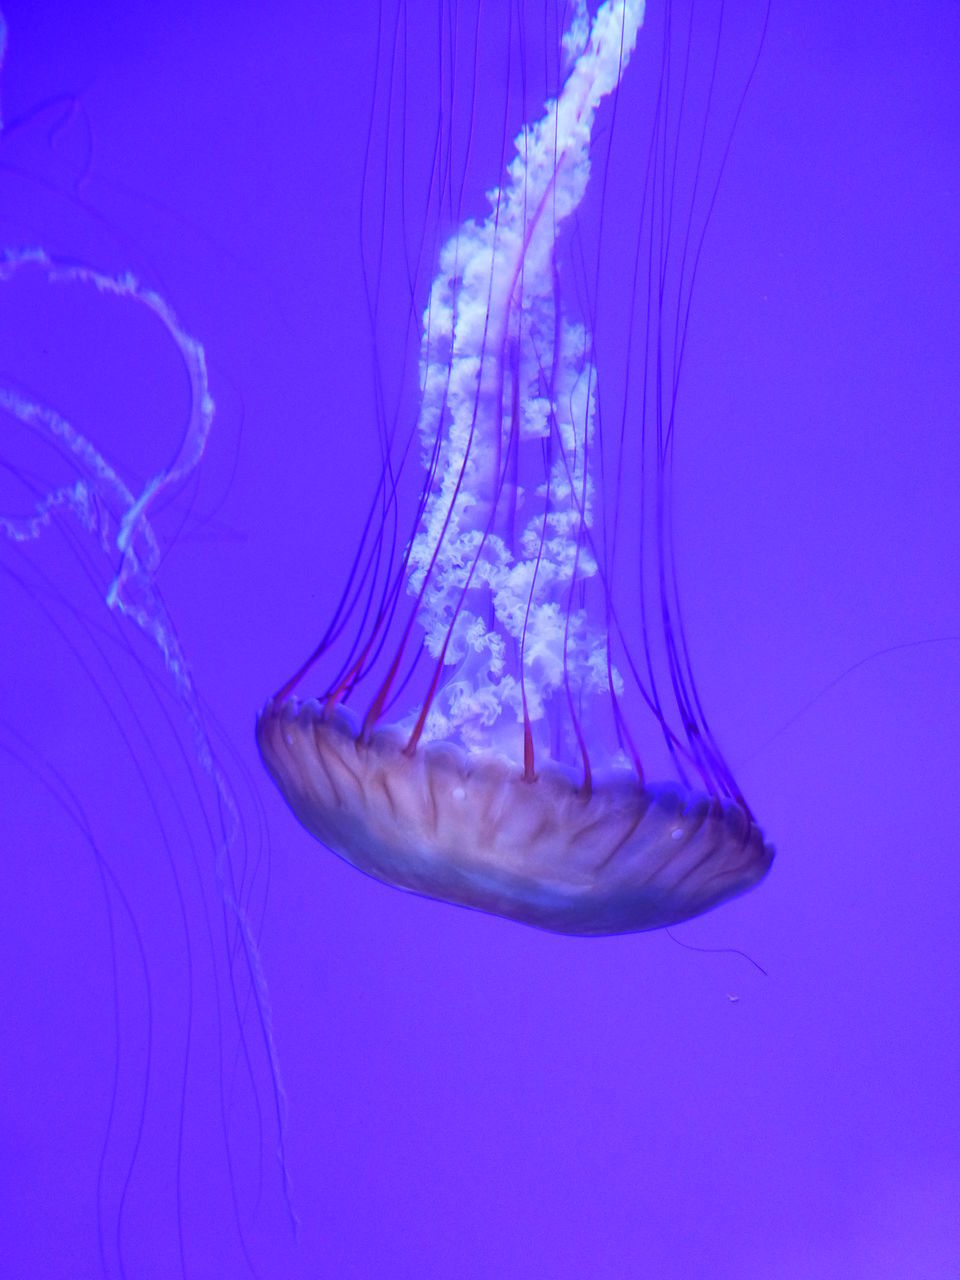 CLOSE-UP OF JELLYFISH AGAINST BLUE BACKGROUND